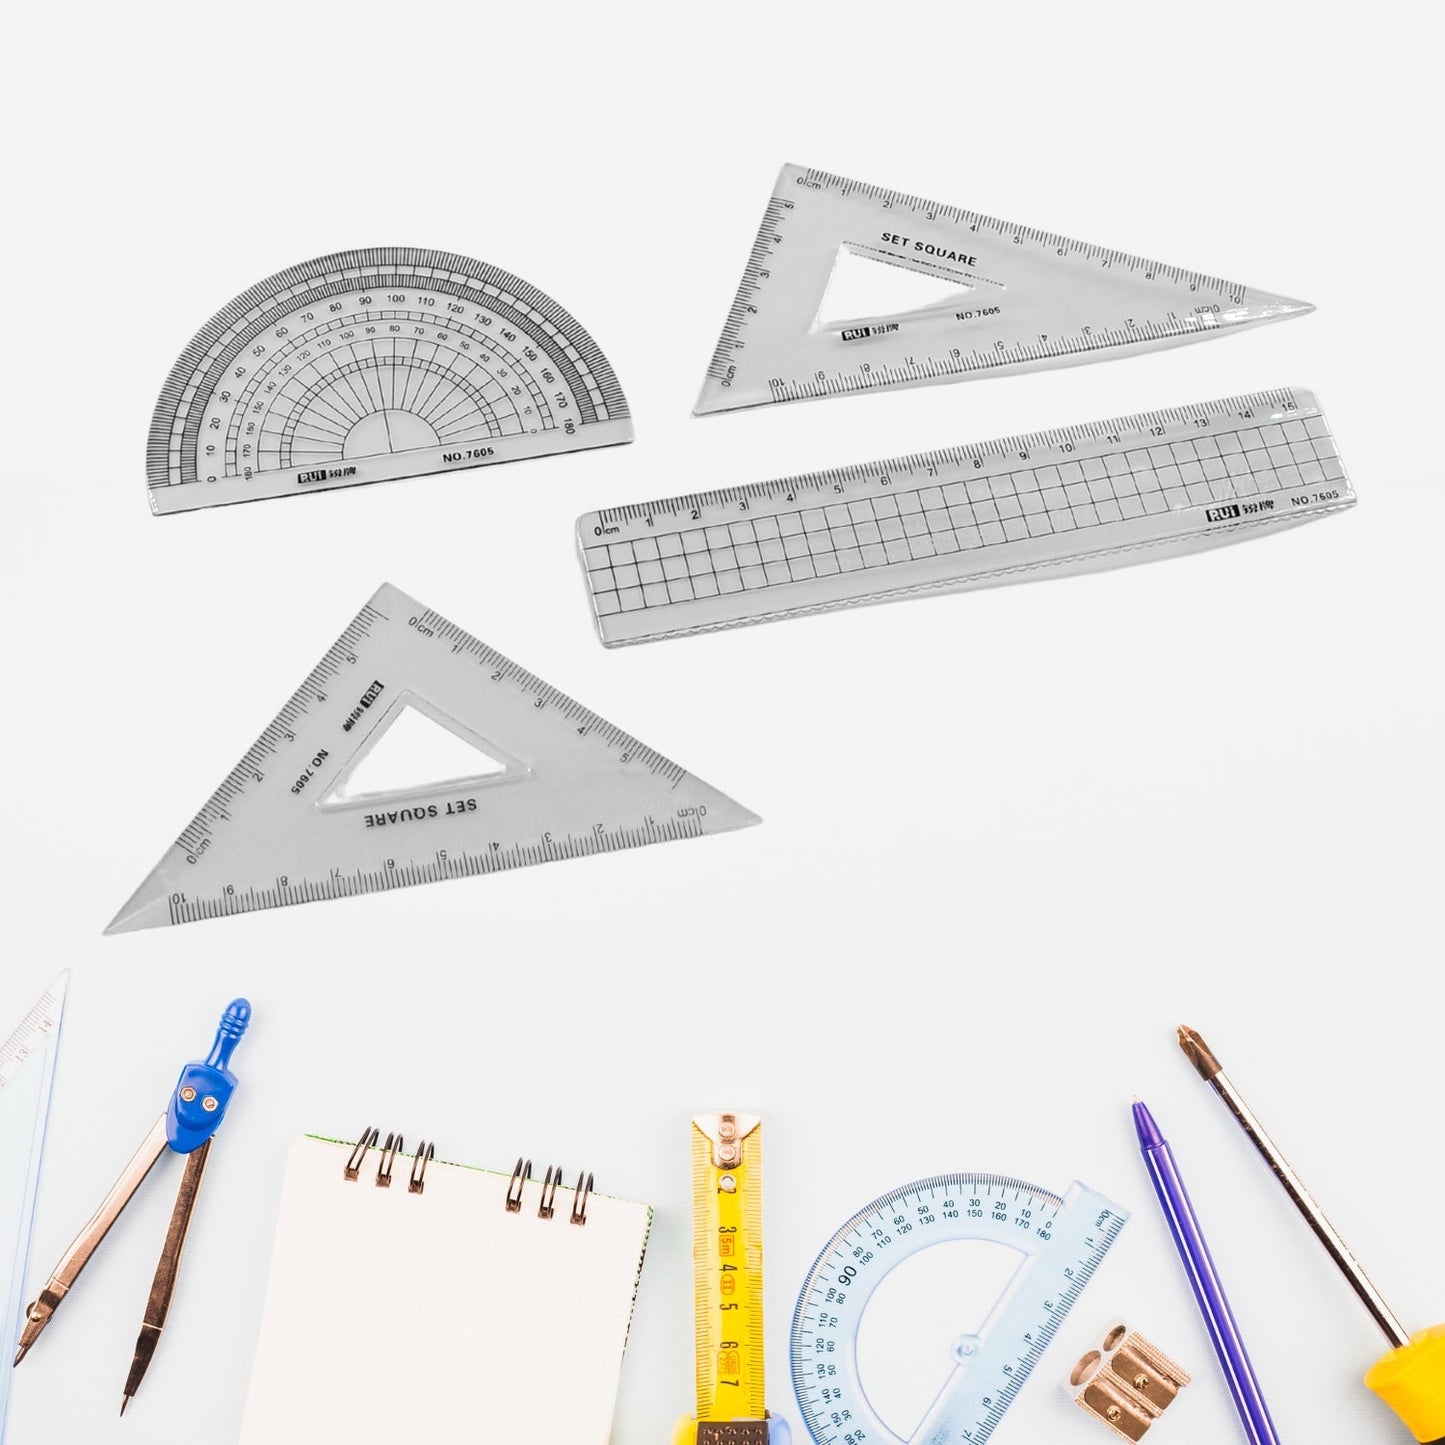 Math Geometry Tool Plastic Clear Ruler Sets, Protractor, Triangle Math Architectural Tools 4 Pieces